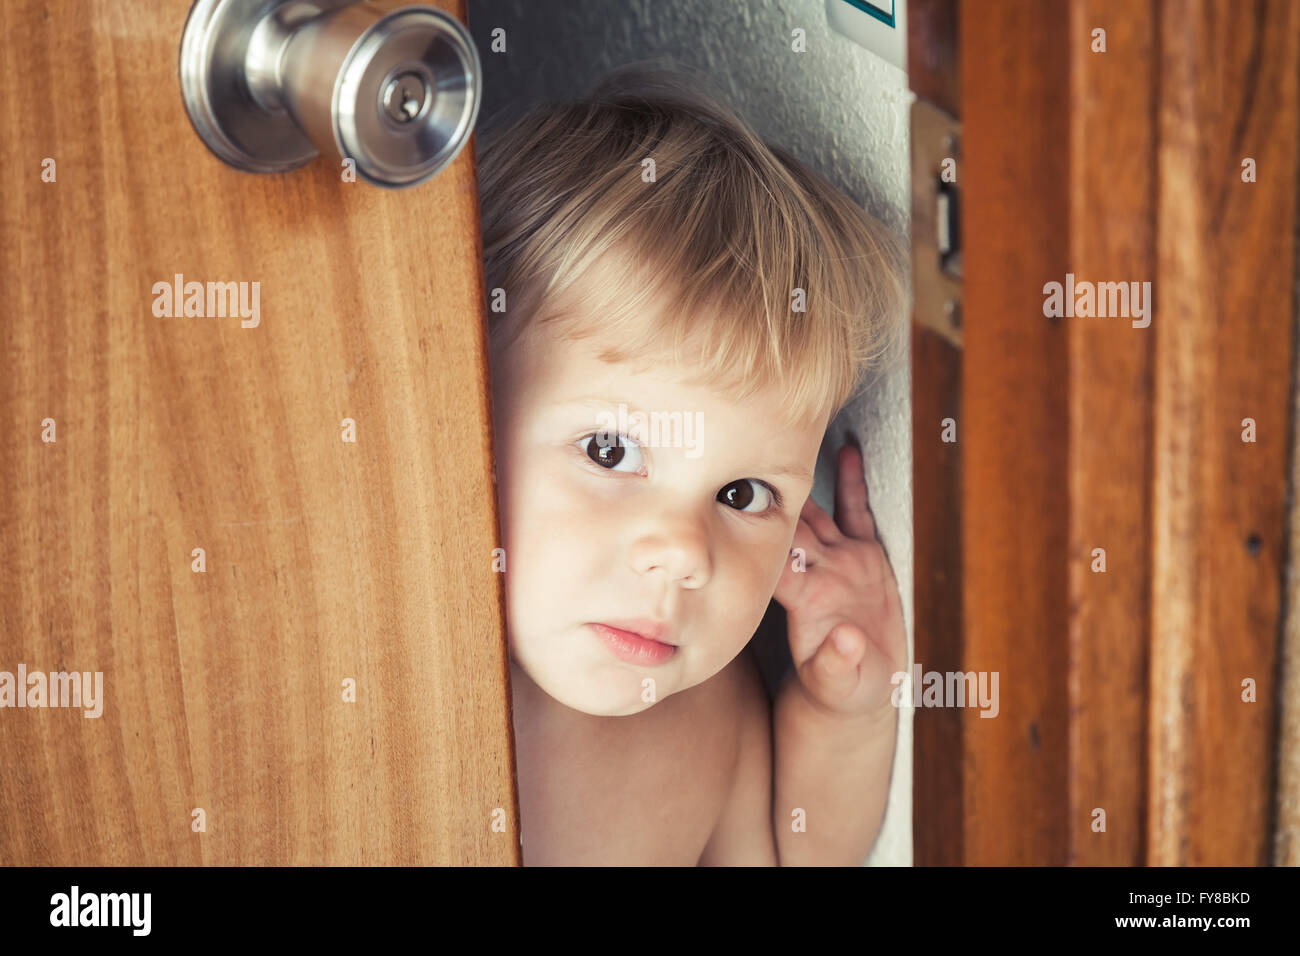 Little Caucasian blond baby opens door and looks outside Stock Photo